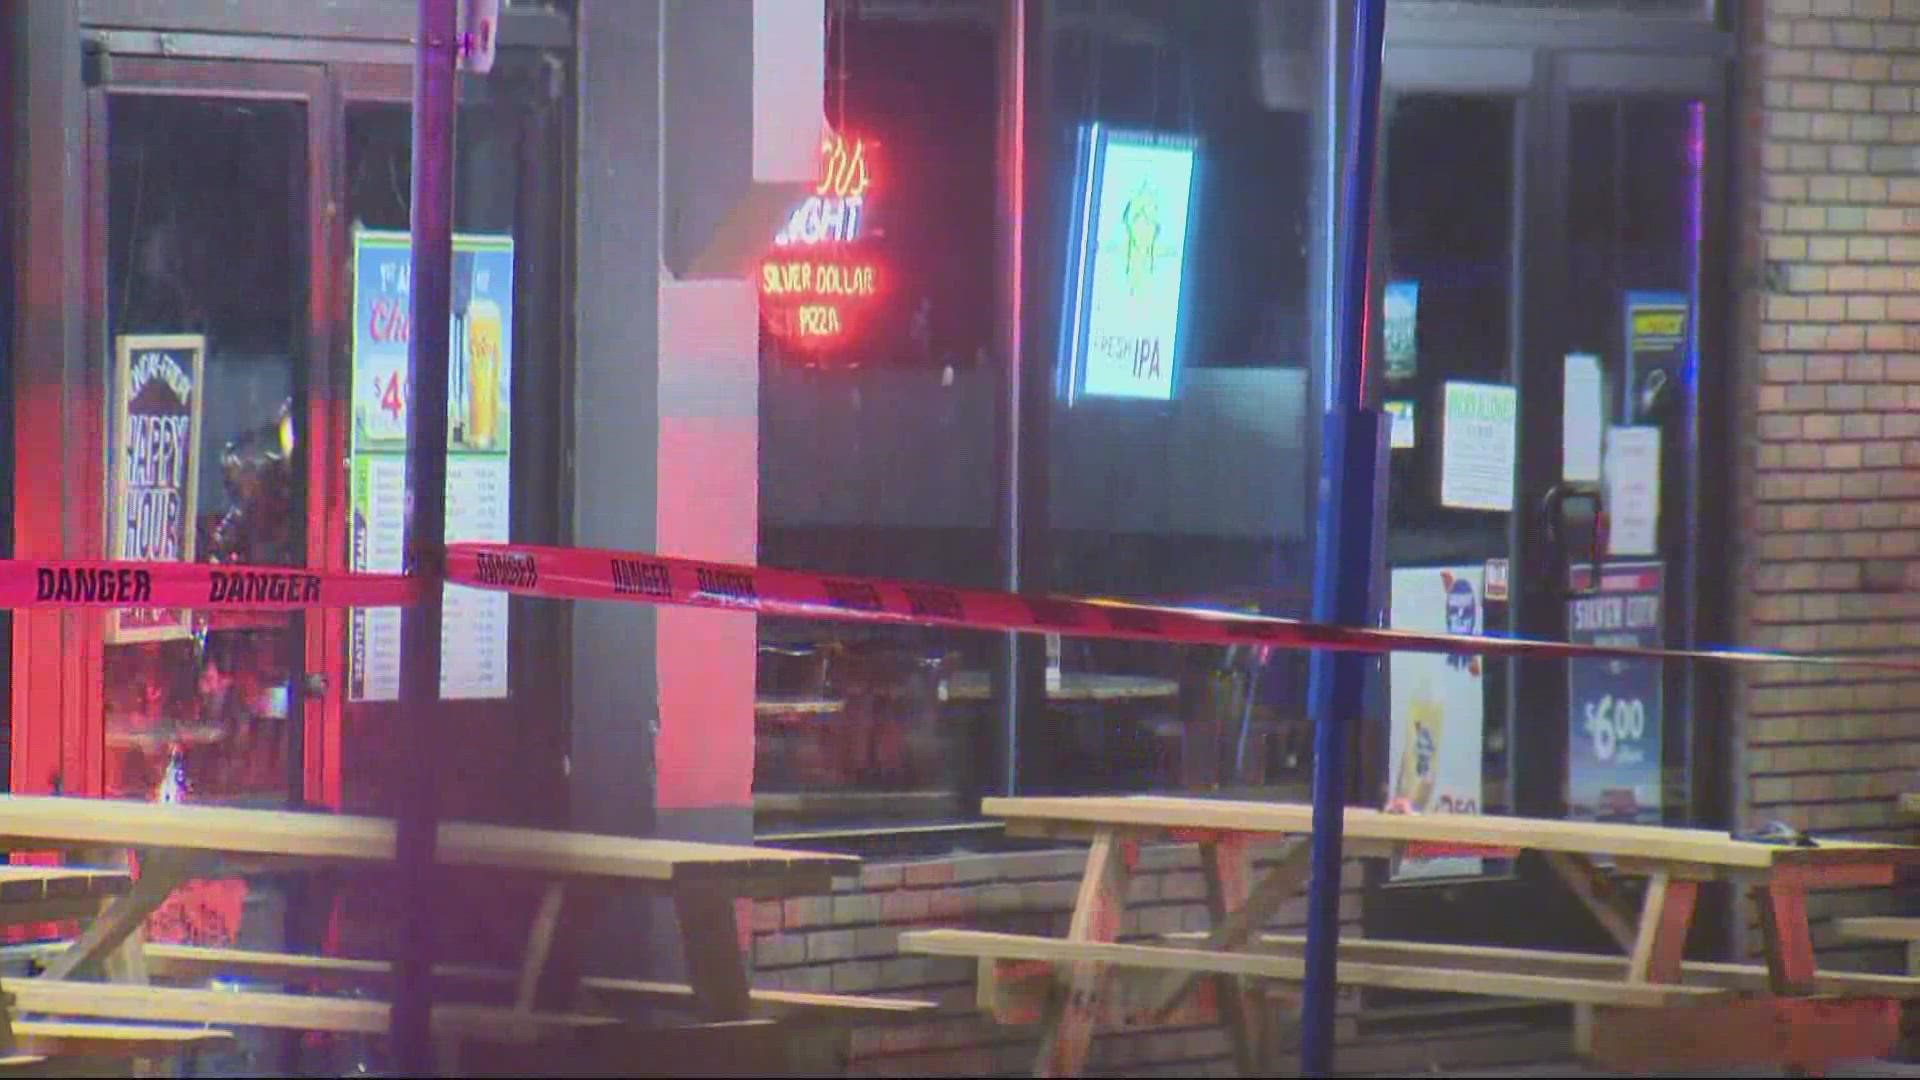 The shooting happened near Silver Dollar Pizza, a sports bar located on the corner of Northwest Glisan Street and 21st Avenue.